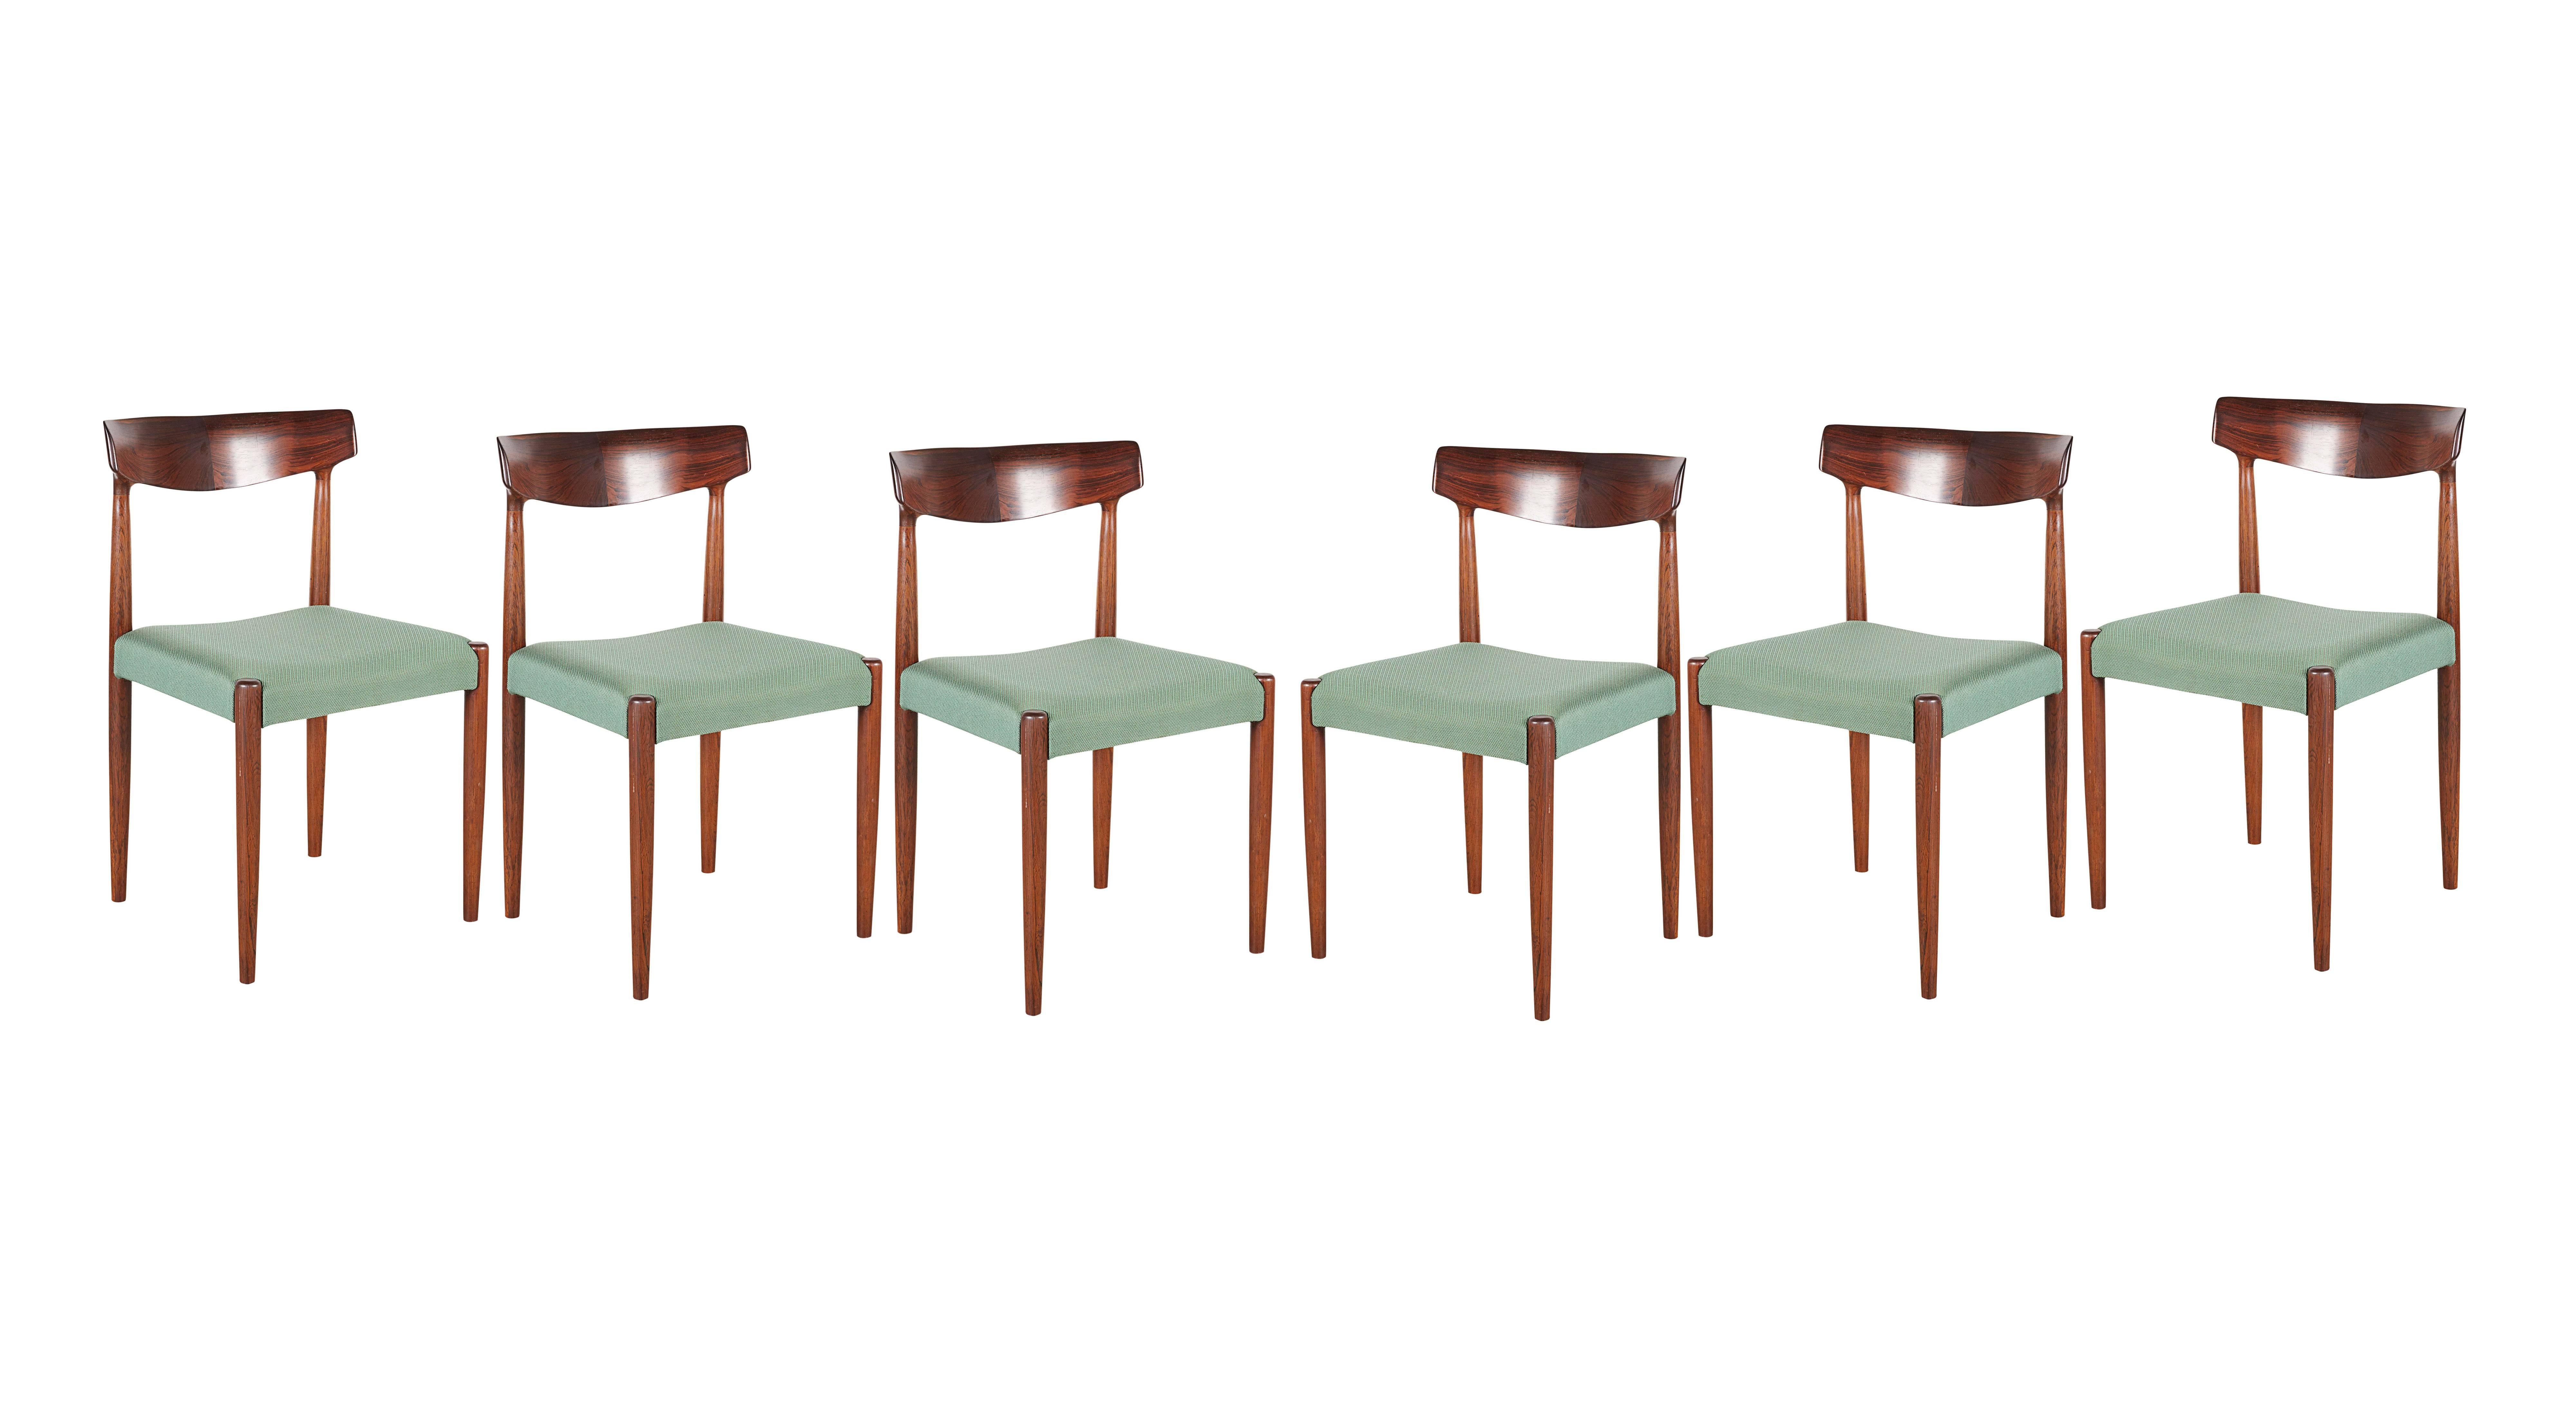 Mid Century 1960s Rosewood Dining Chairs by Knud Faerch

This set of vintage dining chairs are in excellent condition, comfortable, and absolutely beautiful. Knud Faerch's signature butterfly back support really makes these chairs shine. The fabric